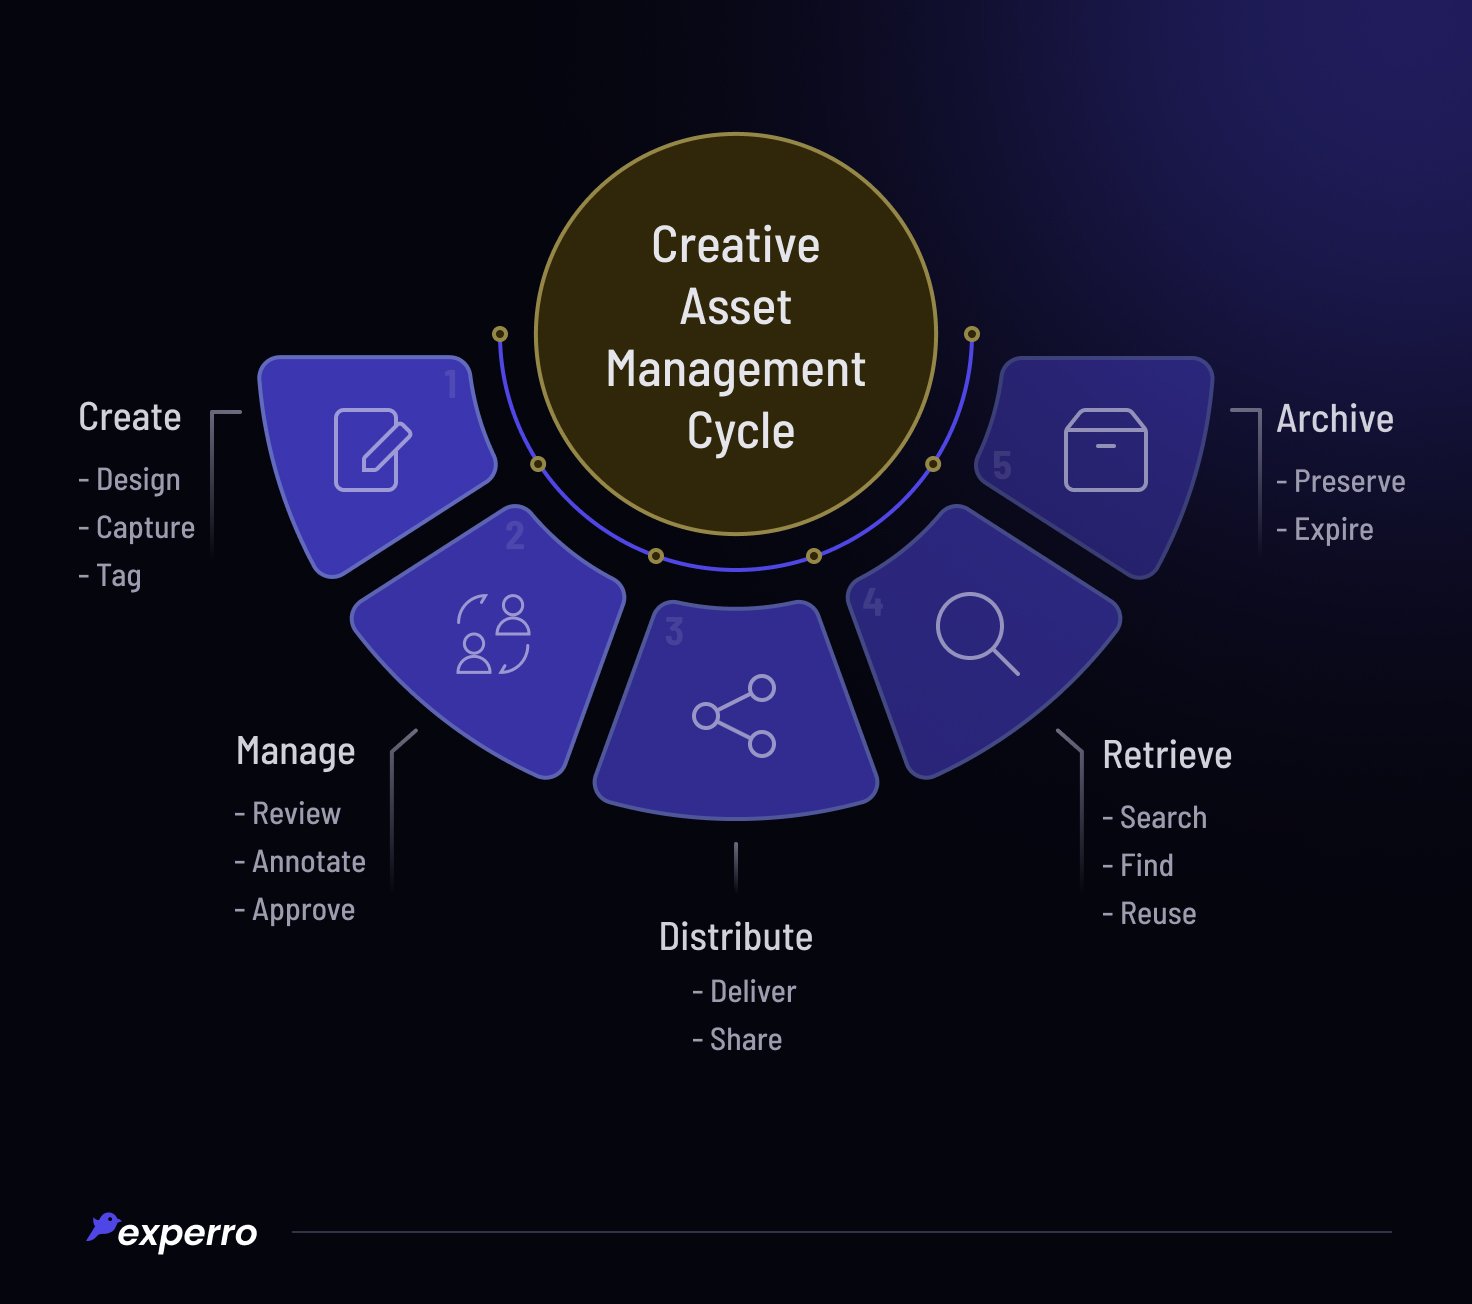 Creative Asset Management Cycle